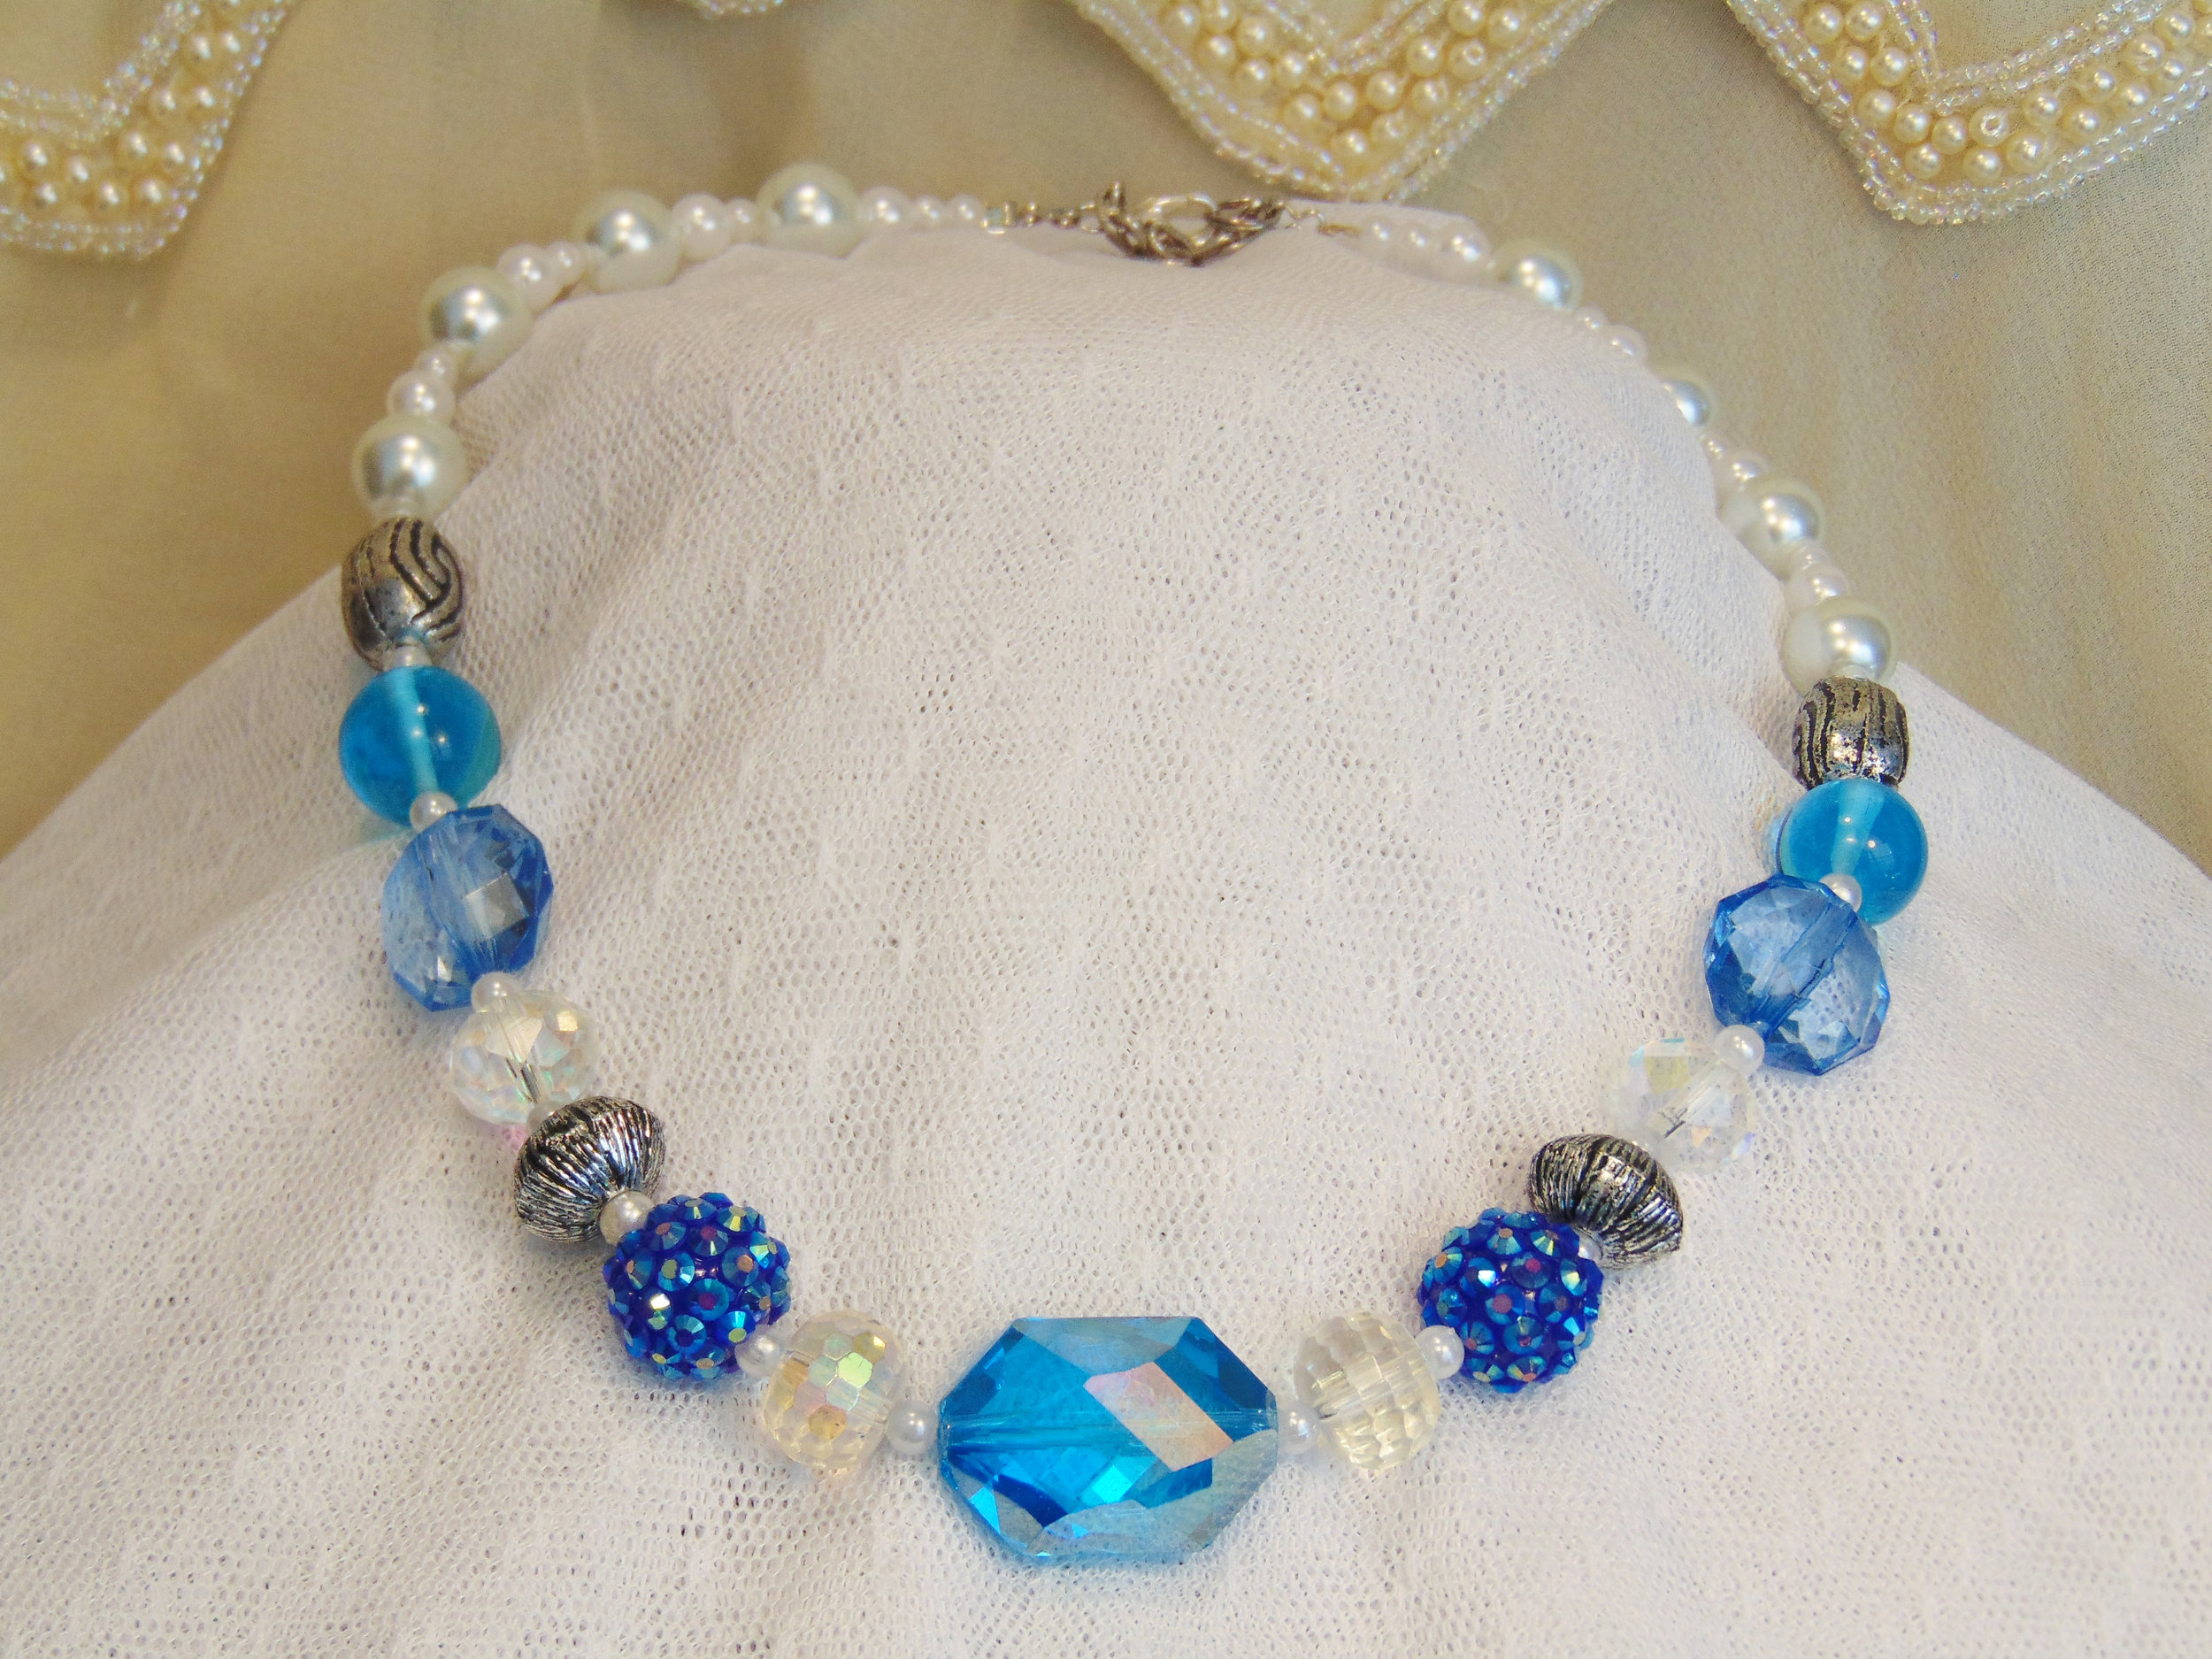 Handmade glass and bead necklaces by JMB Designs